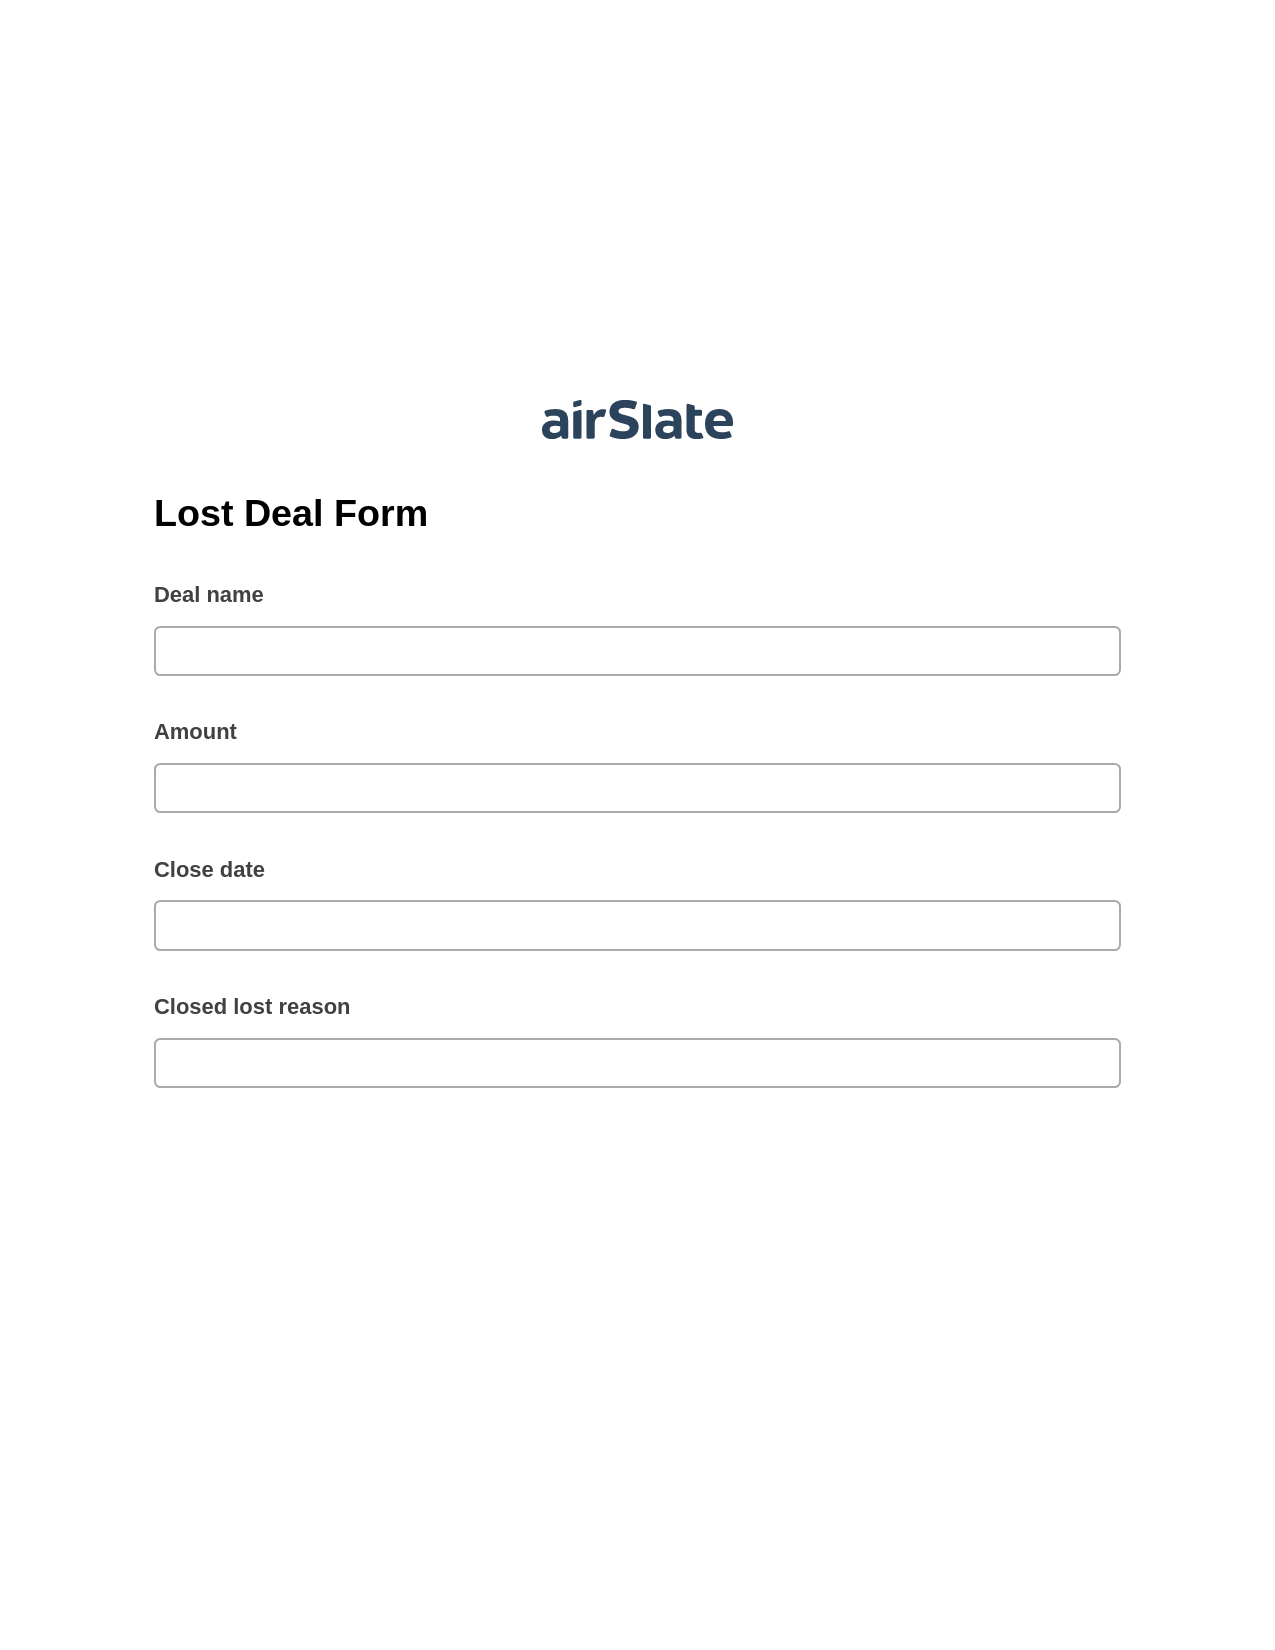 Lost Deal Form Pre-fill from another Slate Bot, Add Tags to Slate Bot, Export to WebMerge Bot